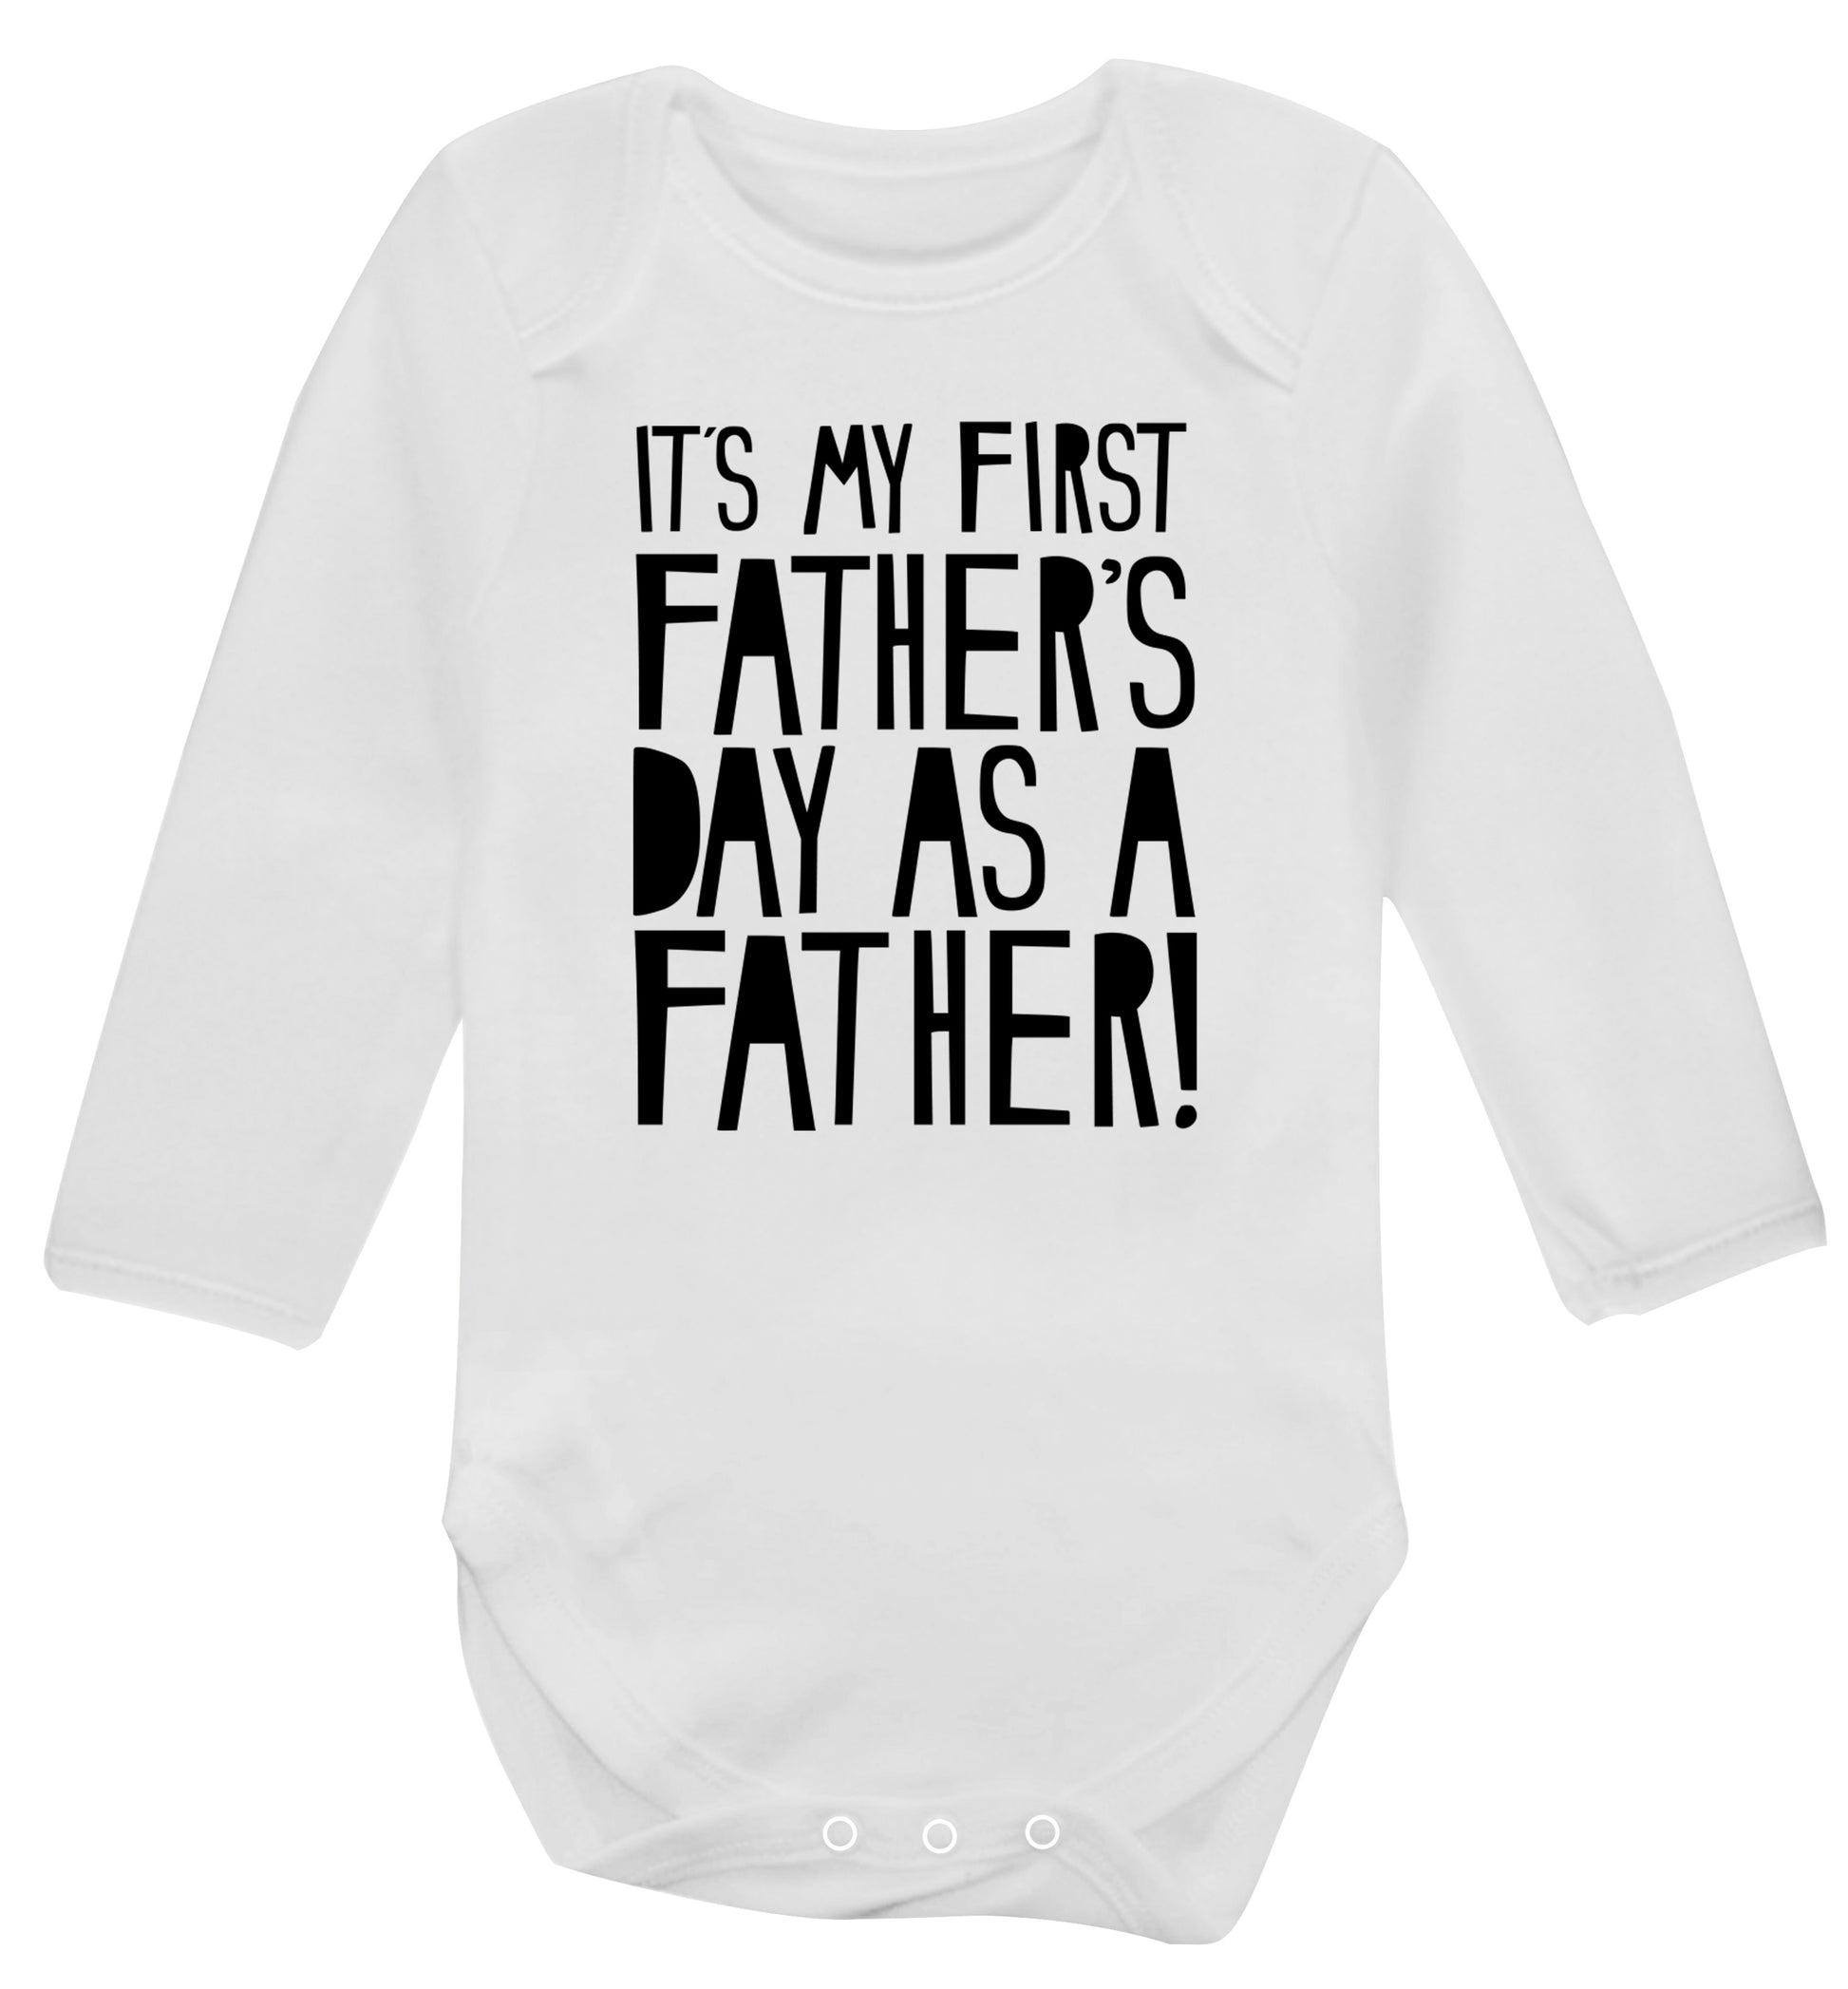 It's my first Father's Day as a father! Baby Vest long sleeved white 6-12 months